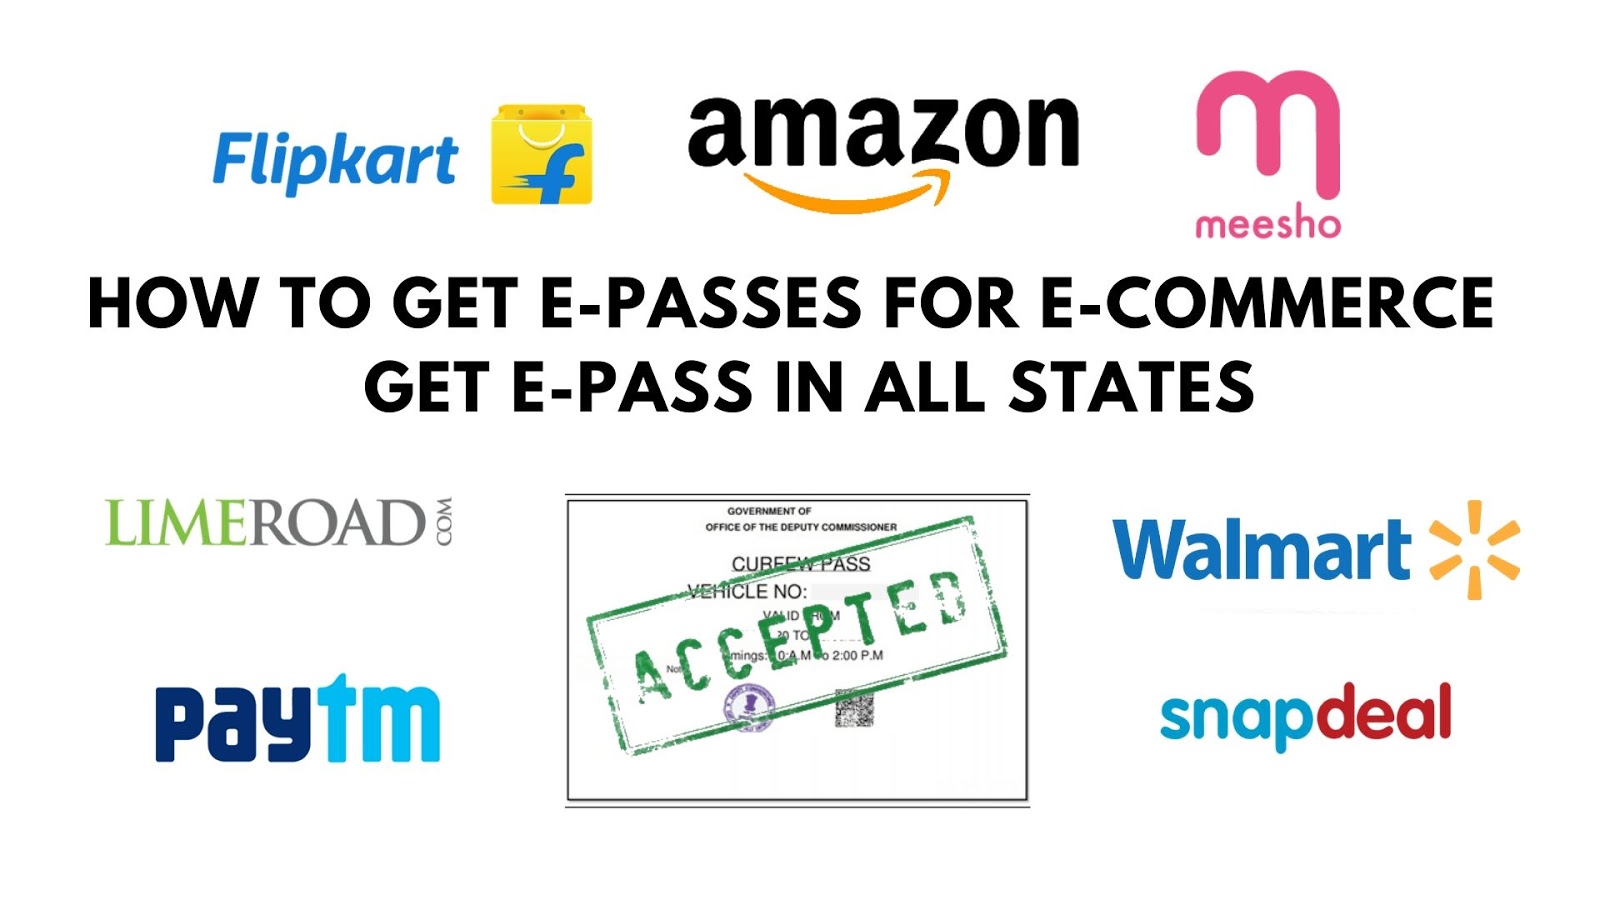 How To Get E-passes For E-Commerce, e pass kese banaye, e pass kaise banaye, e pass kaise banta hai, e pass up kaise banaye, e pass kaise banaye online delhi, e pass kya hota hai, e pass form kaise bhare, e pass apply kaise kare, e pass apply online, how to get e-pass in bangalore, how to get e-pass in hyderabad, how to apply e pass for lockdown, lockdown e pass kaise banaye delhi, e pass kaise banaye up, how to get e-pass in karnataka, how to get passbook, how to get password, how to get e-pass in pune, how to get passport, e pass kaise banaye online, e pass, e pass lockdown kya hai, how to get e-passport, how to get e-passport application form, how to get e-pass for lockdown, how to get e-pass in nepal, how to get a passport india, how to get e-pass in tamilnadu, how to get e-pass in aarogya setu app, how to get e-pass during lockdown, how to get e-pass in chennai, how to get a passport, how to get epass number,